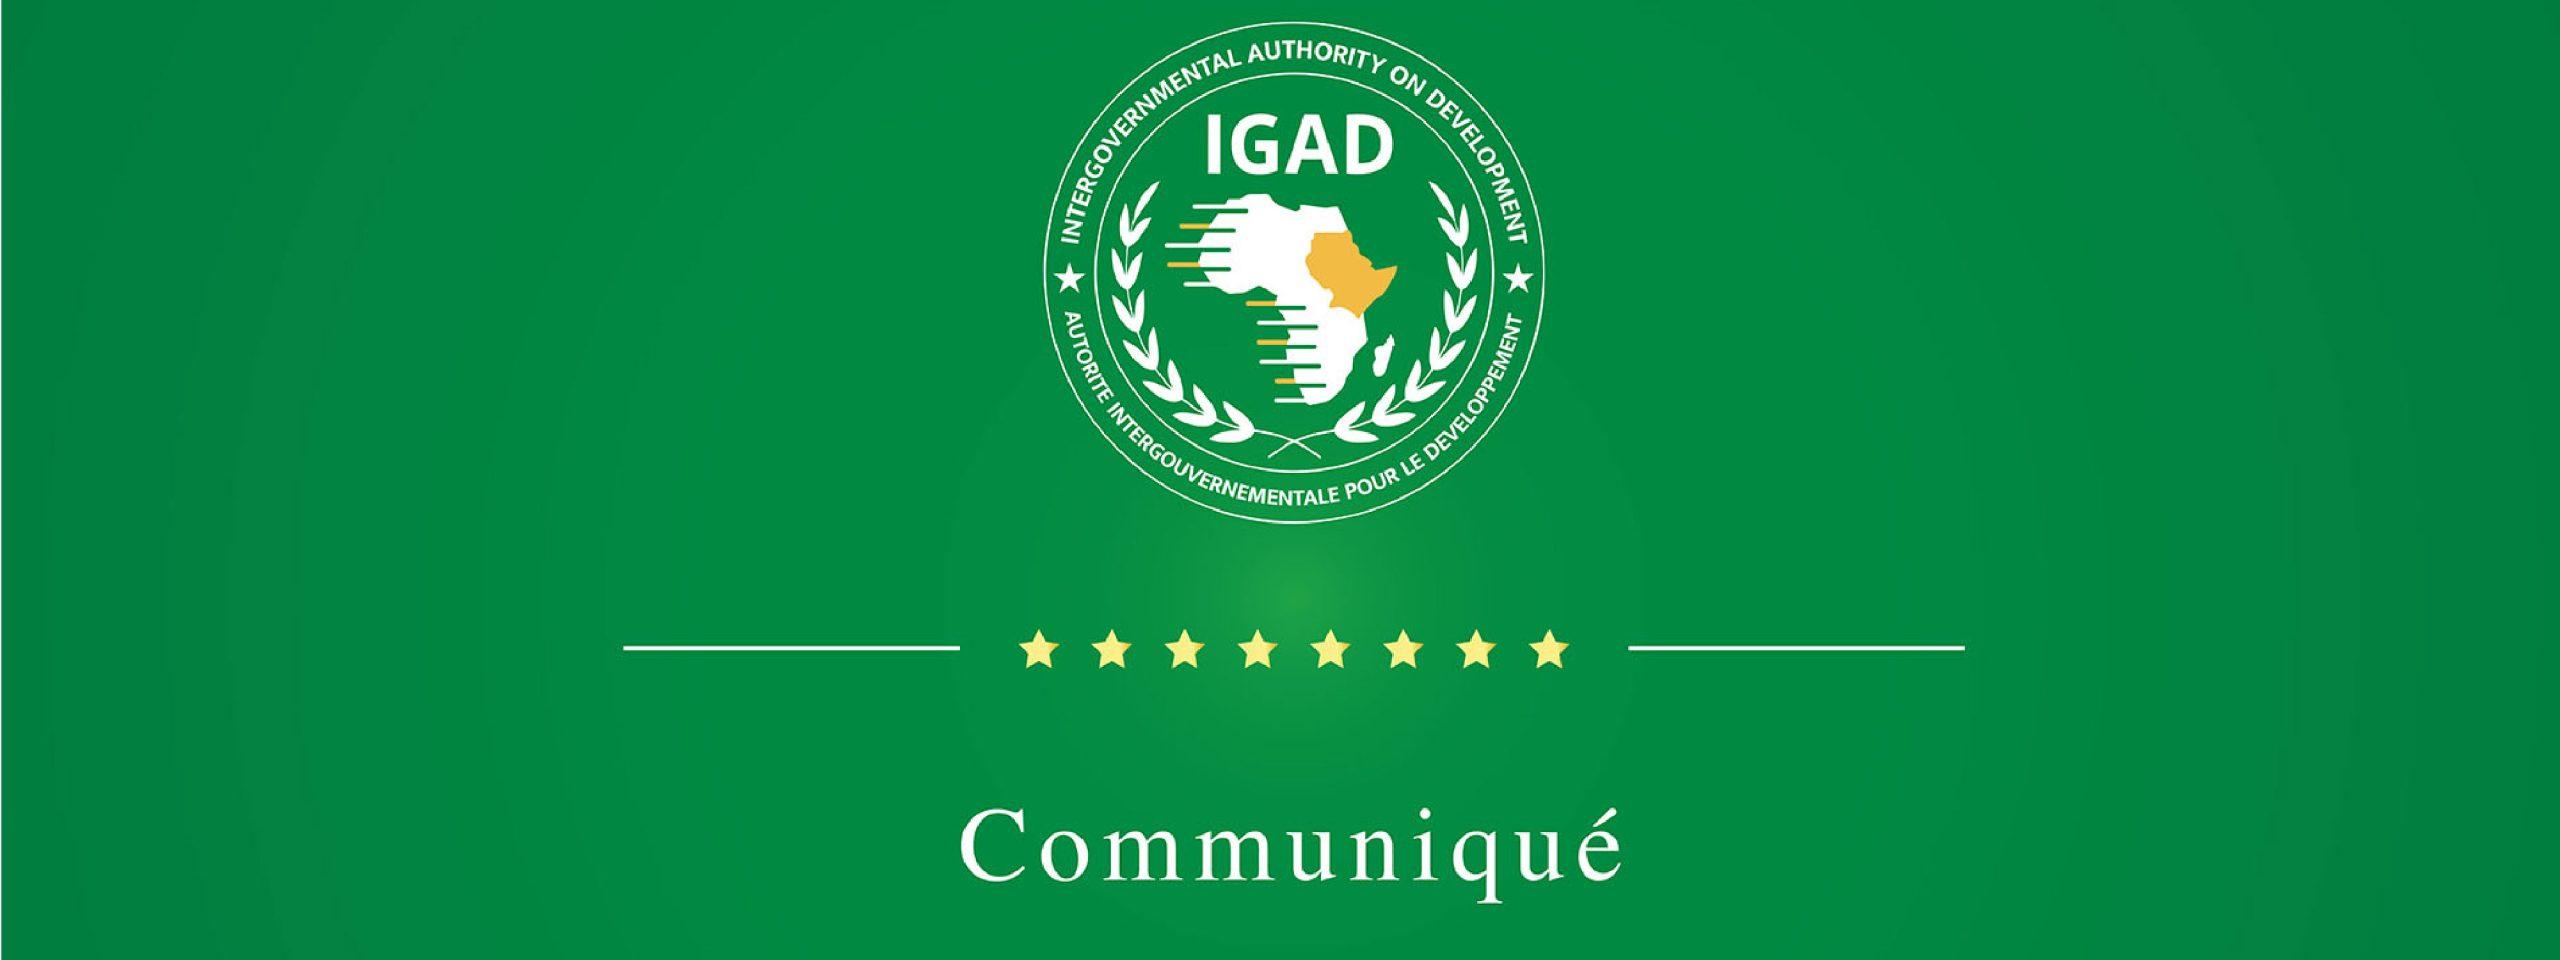 COMMUNIQUÉ  of the IGAD Women Peace and Security Forum Relaunching Conference